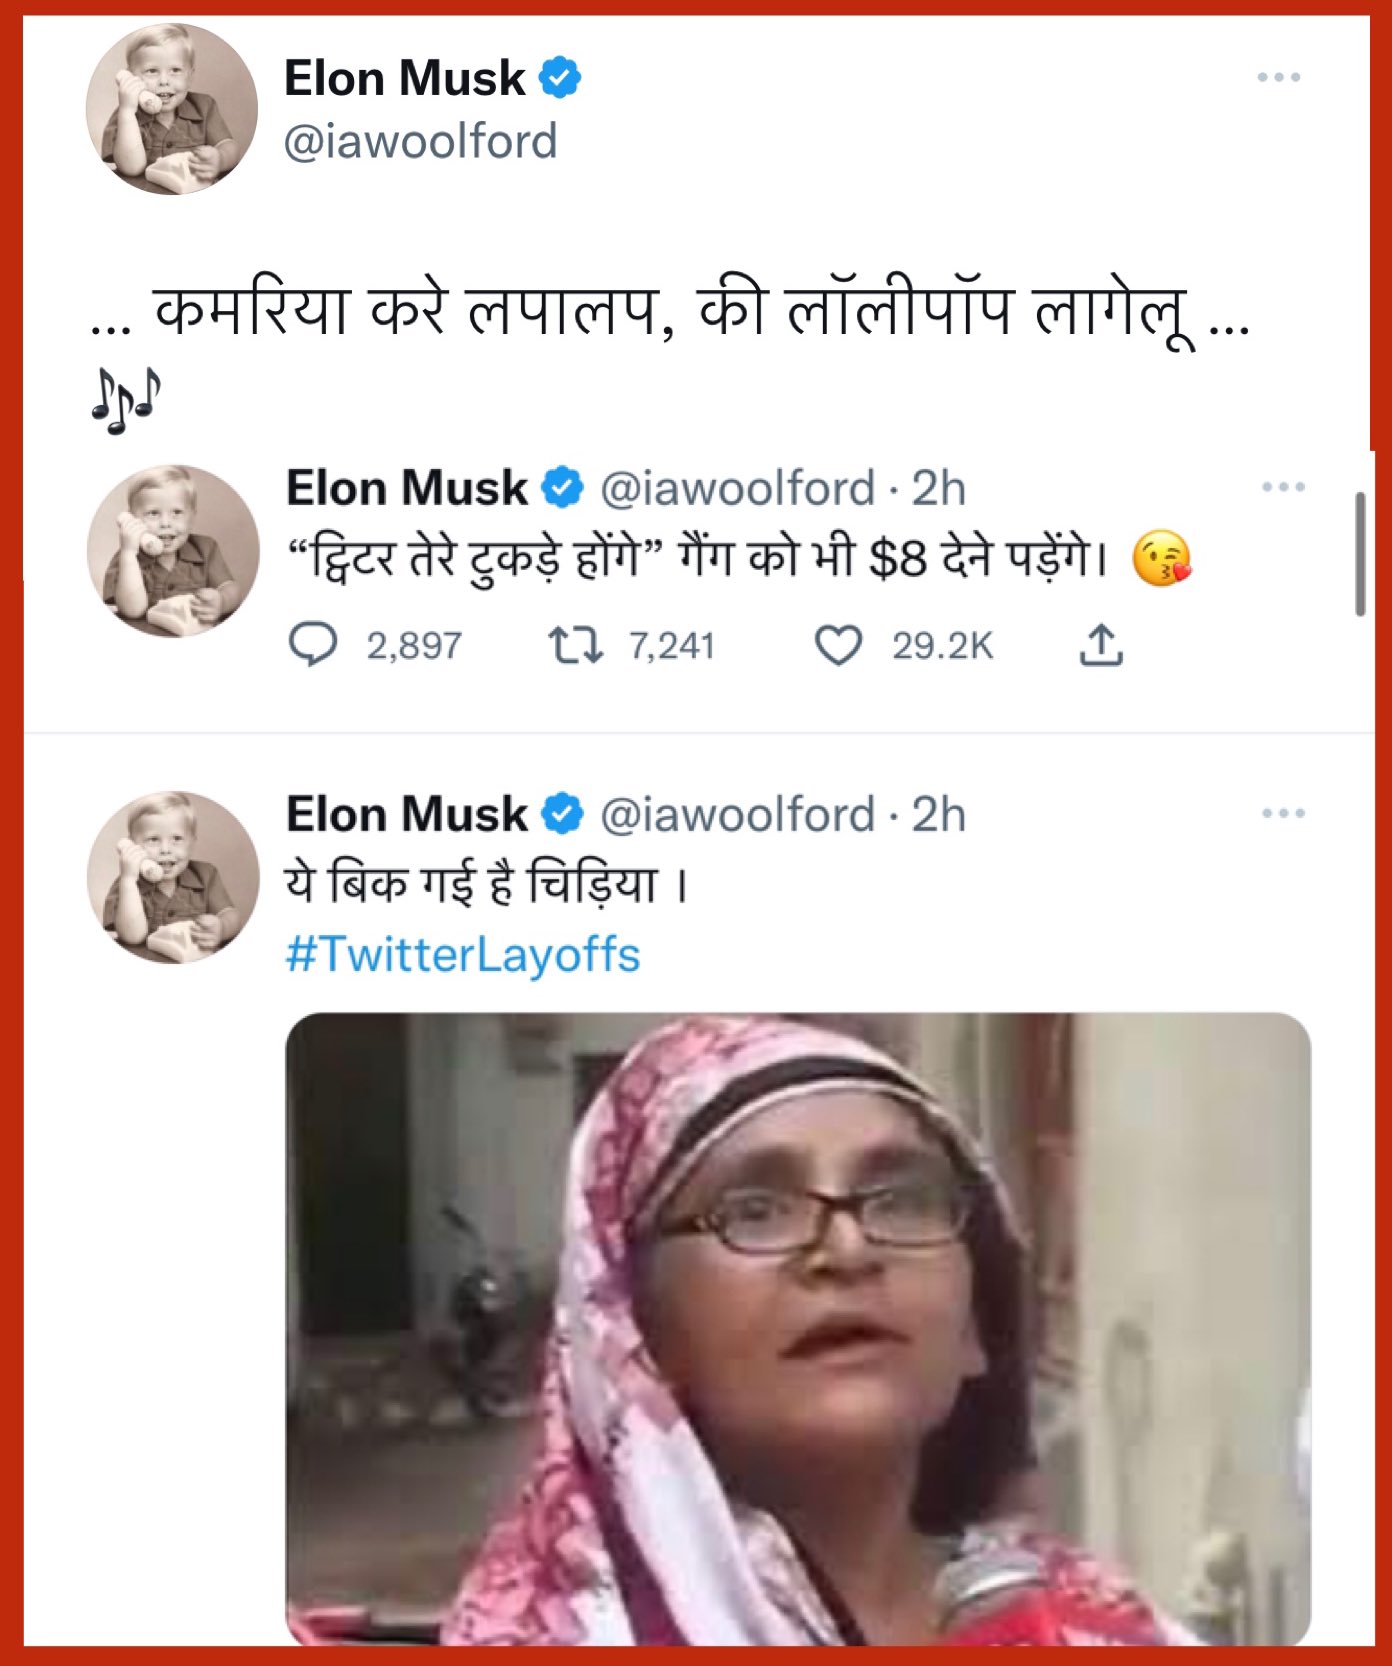 After Bhojpuri tweets, 'Elon Musk' verified handle stands suspended now